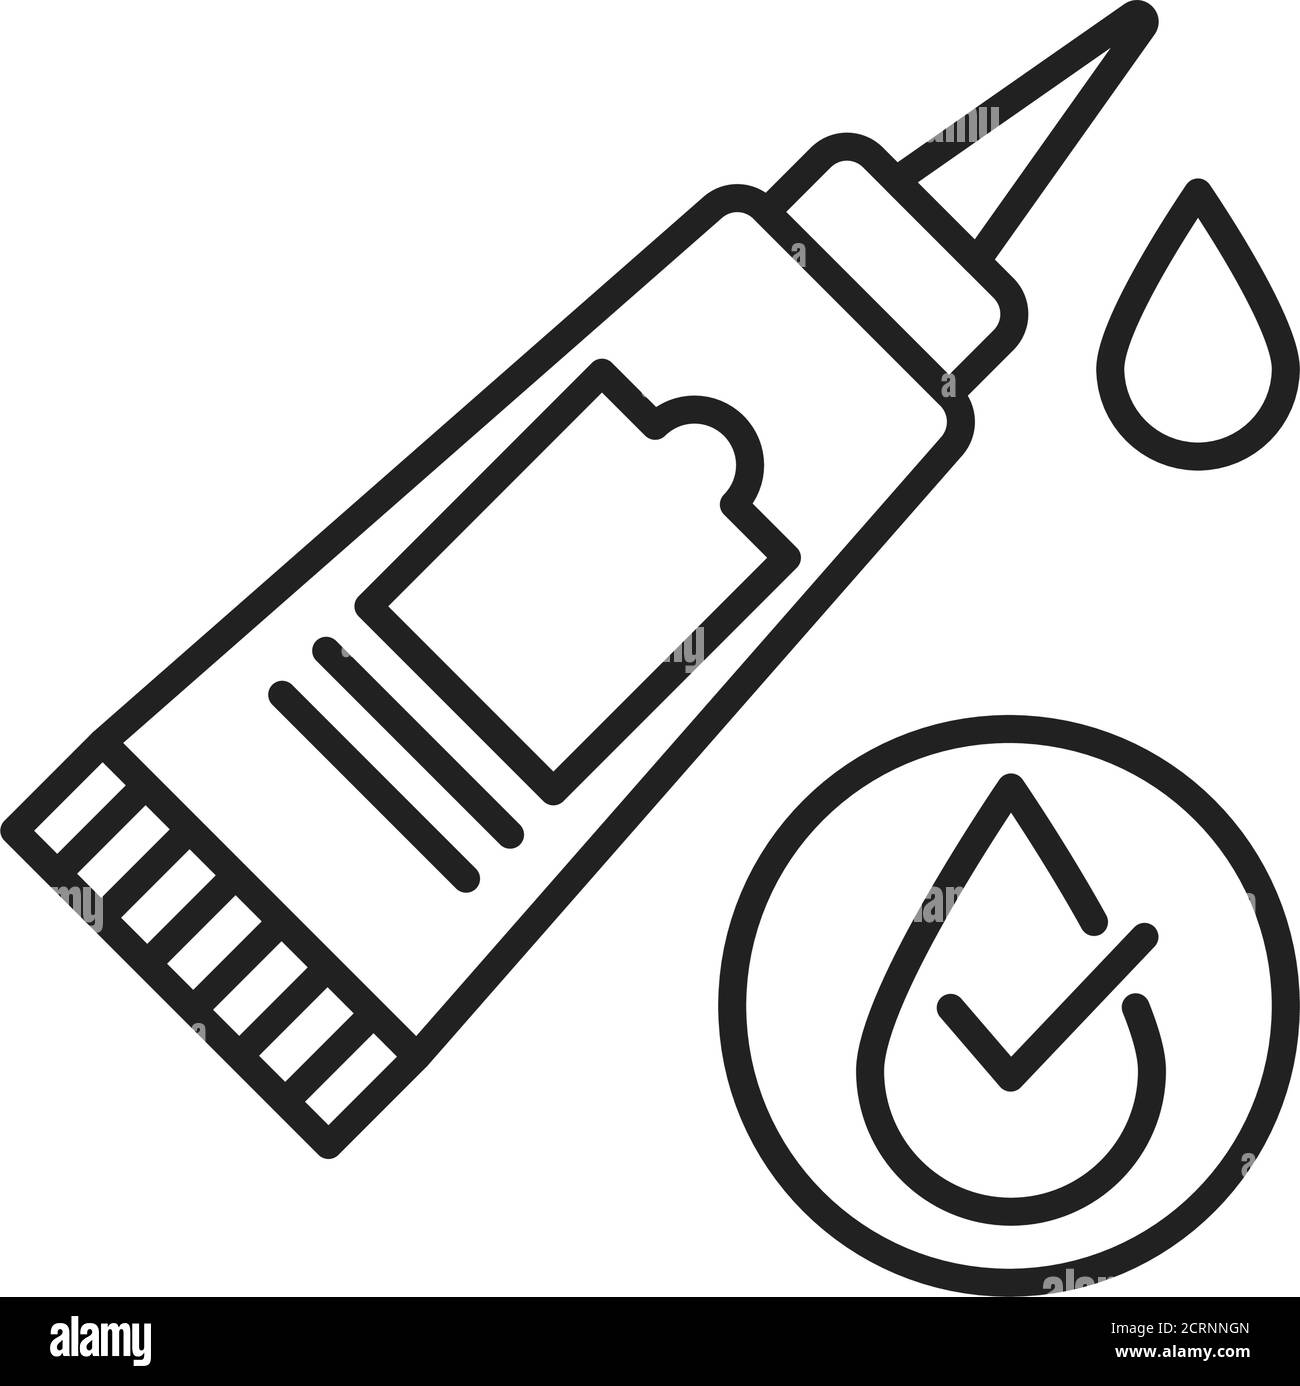 Waterproof glue black line icon. Water repellent absorbing substance concept. Impermeable adhesive tube sign. Pictogram for web page, mobile app Stock Vector